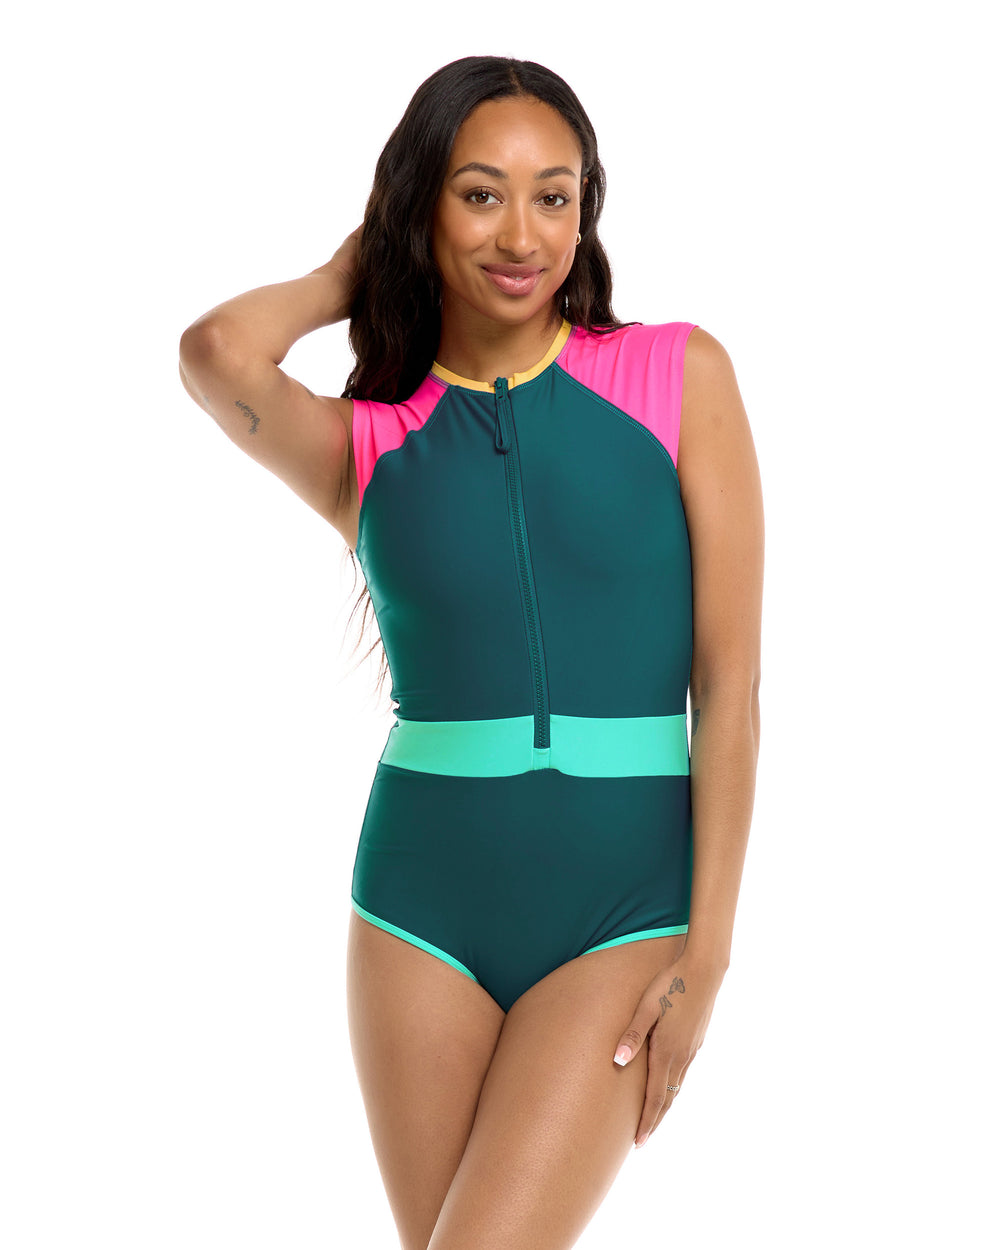 Vibration Stand Up One-Piece Swimsuit - Kingfisher